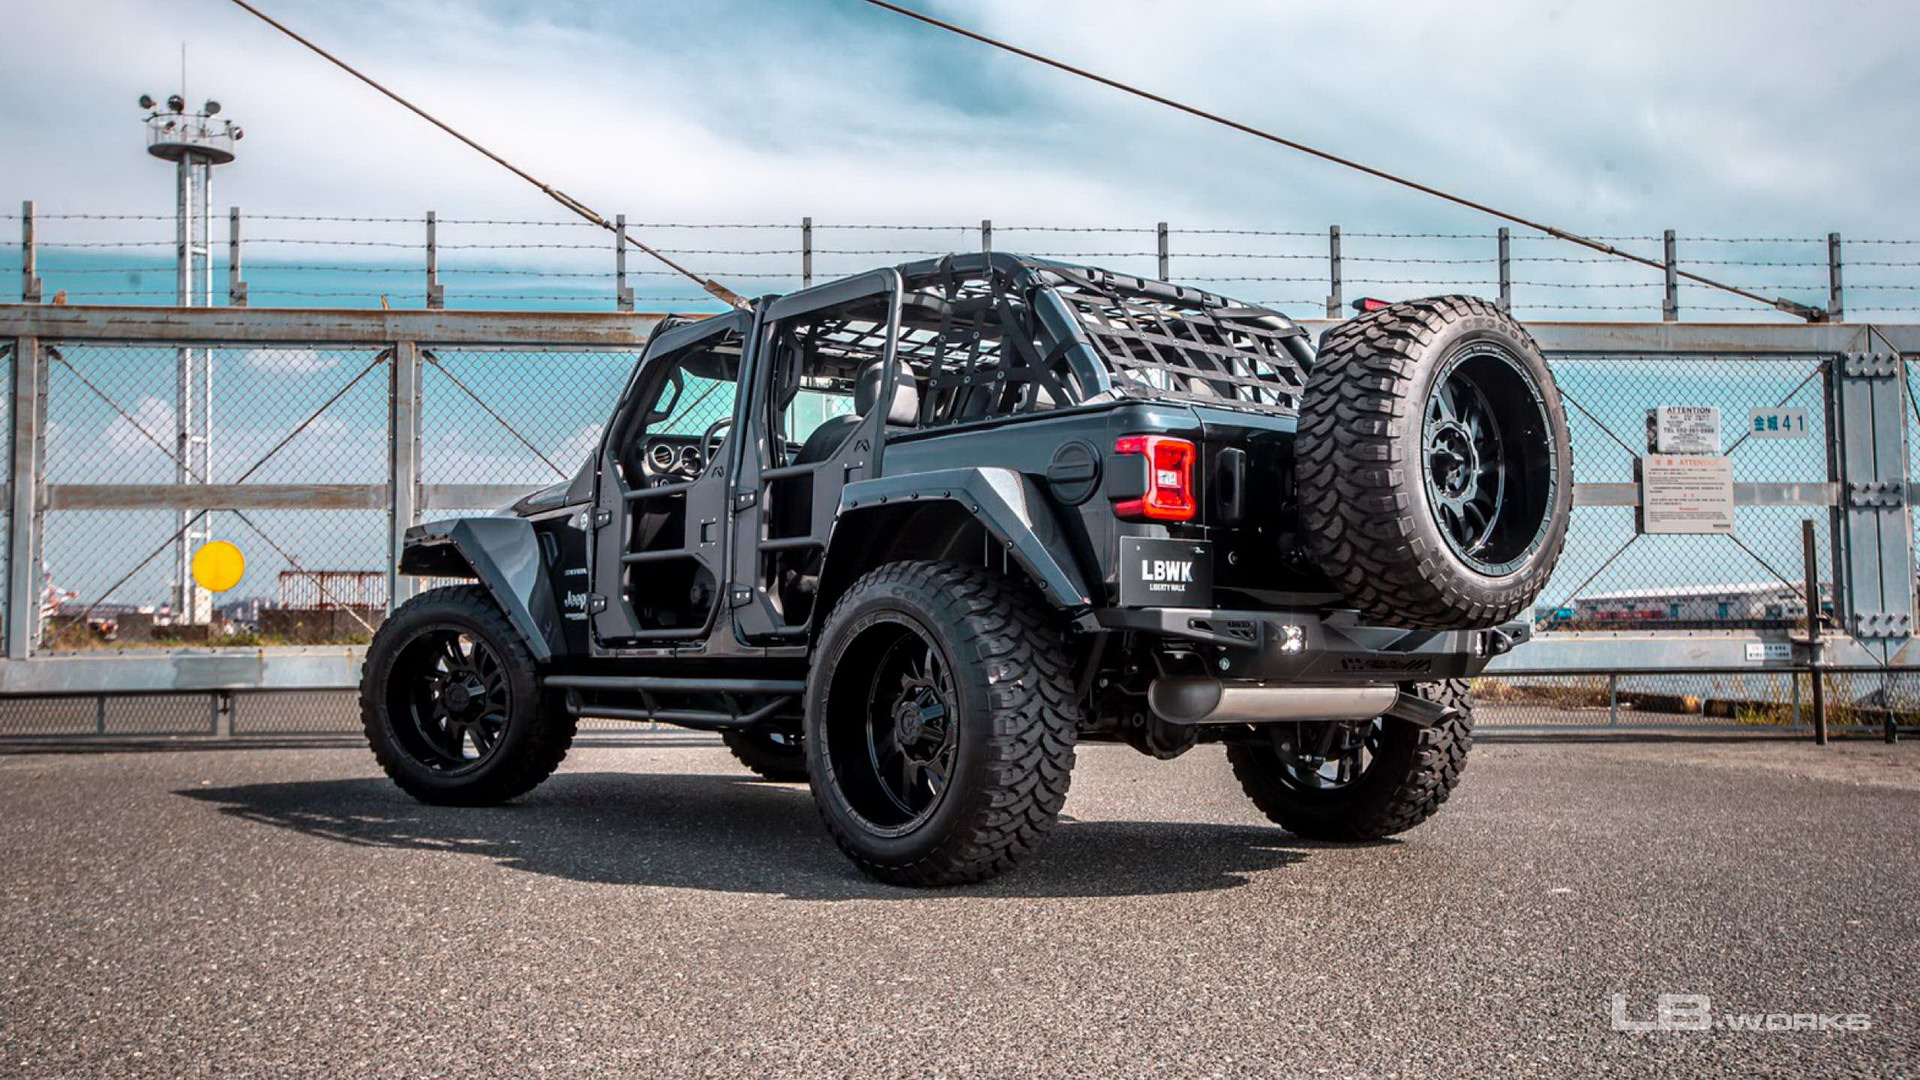 Liberty Walk Gives The Jeep Wrangler An Apocalyptic Makeover | Carscoops